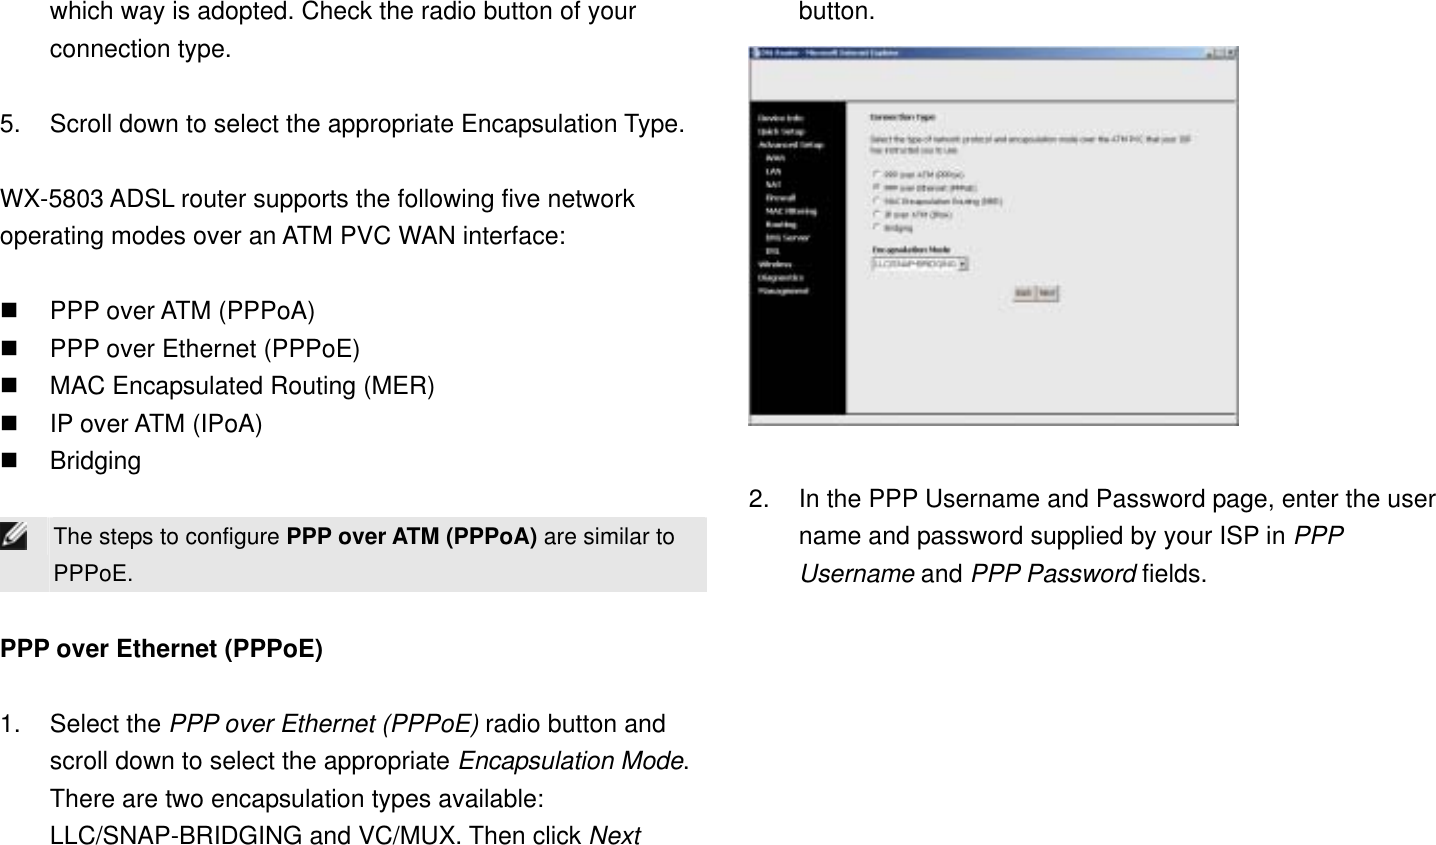 which way is adopted. Check the radio button of your connection type.  5.  Scroll down to select the appropriate Encapsulation Type.  WX-5803 ADSL router supports the following five network operating modes over an ATM PVC WAN interface:    PPP over ATM (PPPoA)   PPP over Ethernet (PPPoE)   MAC Encapsulated Routing (MER)   IP over ATM (IPoA)   Bridging   The steps to configure PPP over ATM (PPPoA) are similar to PPPoE.  PPP over Ethernet (PPPoE)  1. Select the PPP over Ethernet (PPPoE) radio button and scroll down to select the appropriate Encapsulation Mode. There are two encapsulation types available: LLC/SNAP-BRIDGING and VC/MUX. Then click Next button.   2.  In the PPP Username and Password page, enter the user name and password supplied by your ISP in PPP Username and PPP Password fields. 